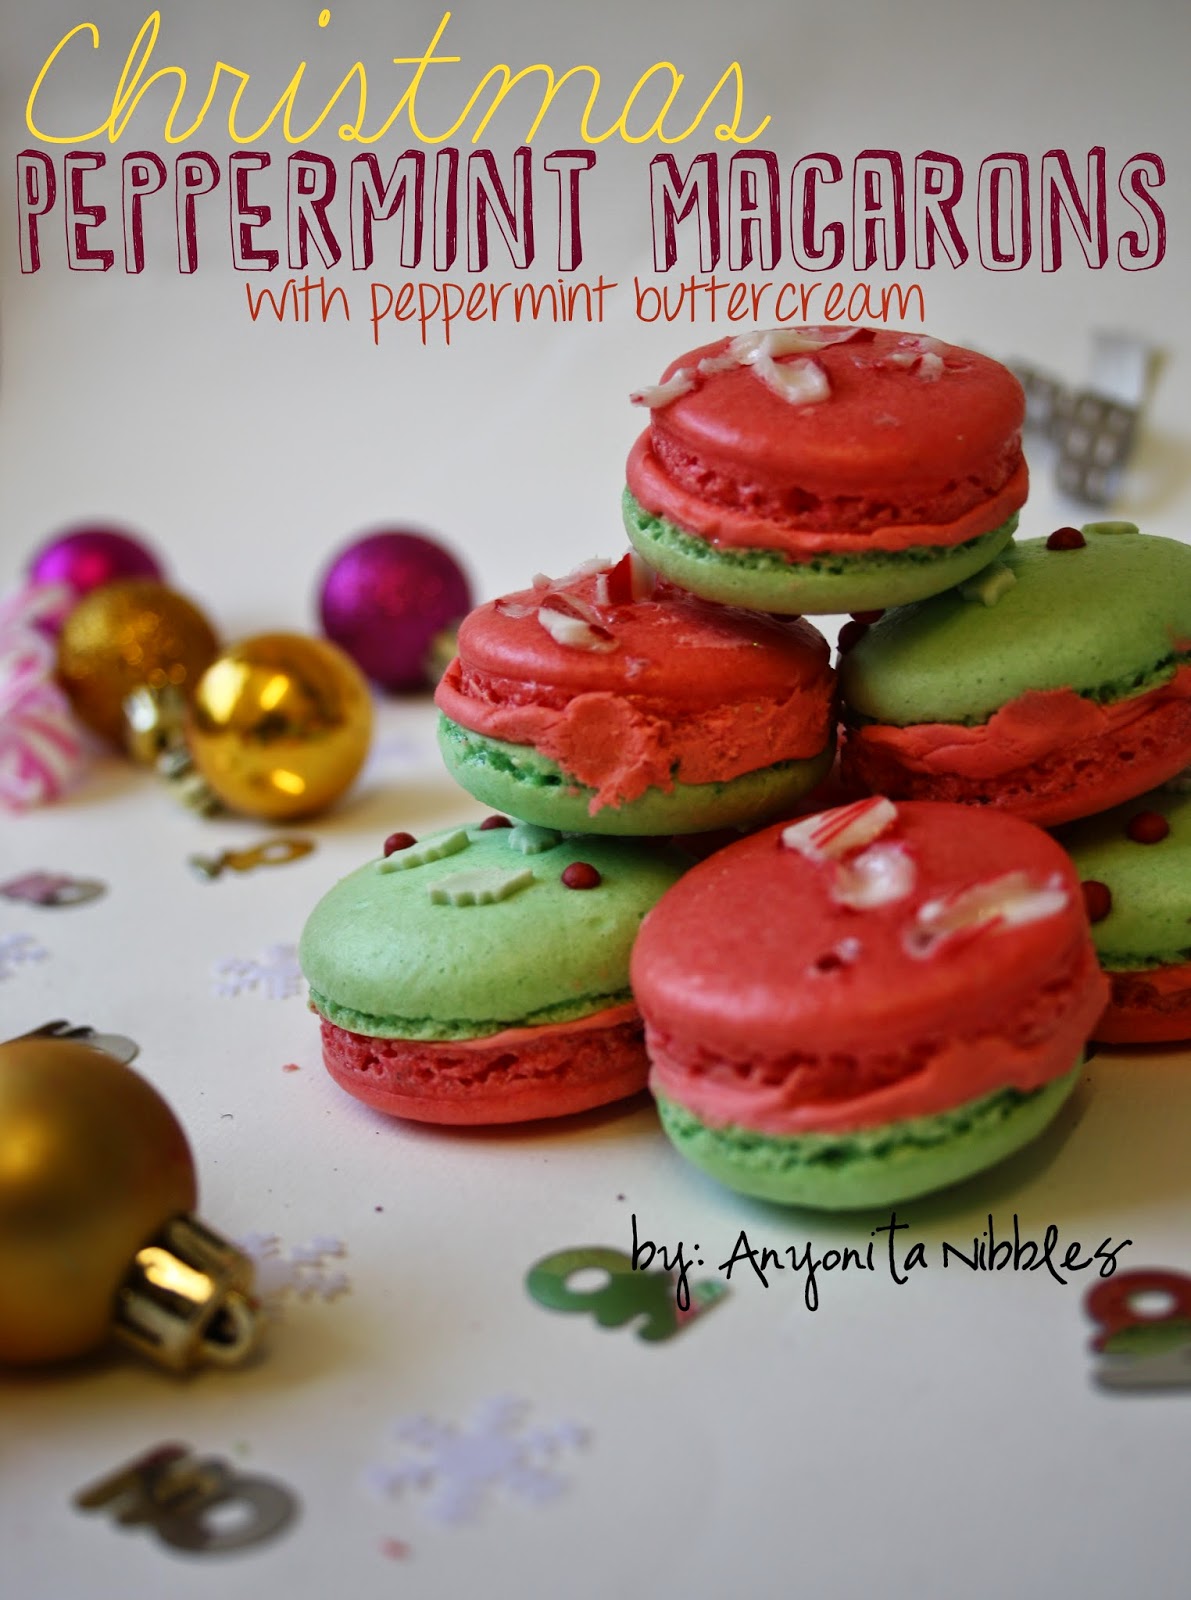 Gluten Free Christmas Peppermint Macarons with Peppermint Buttercream from anyonita-nibbles.co.uk